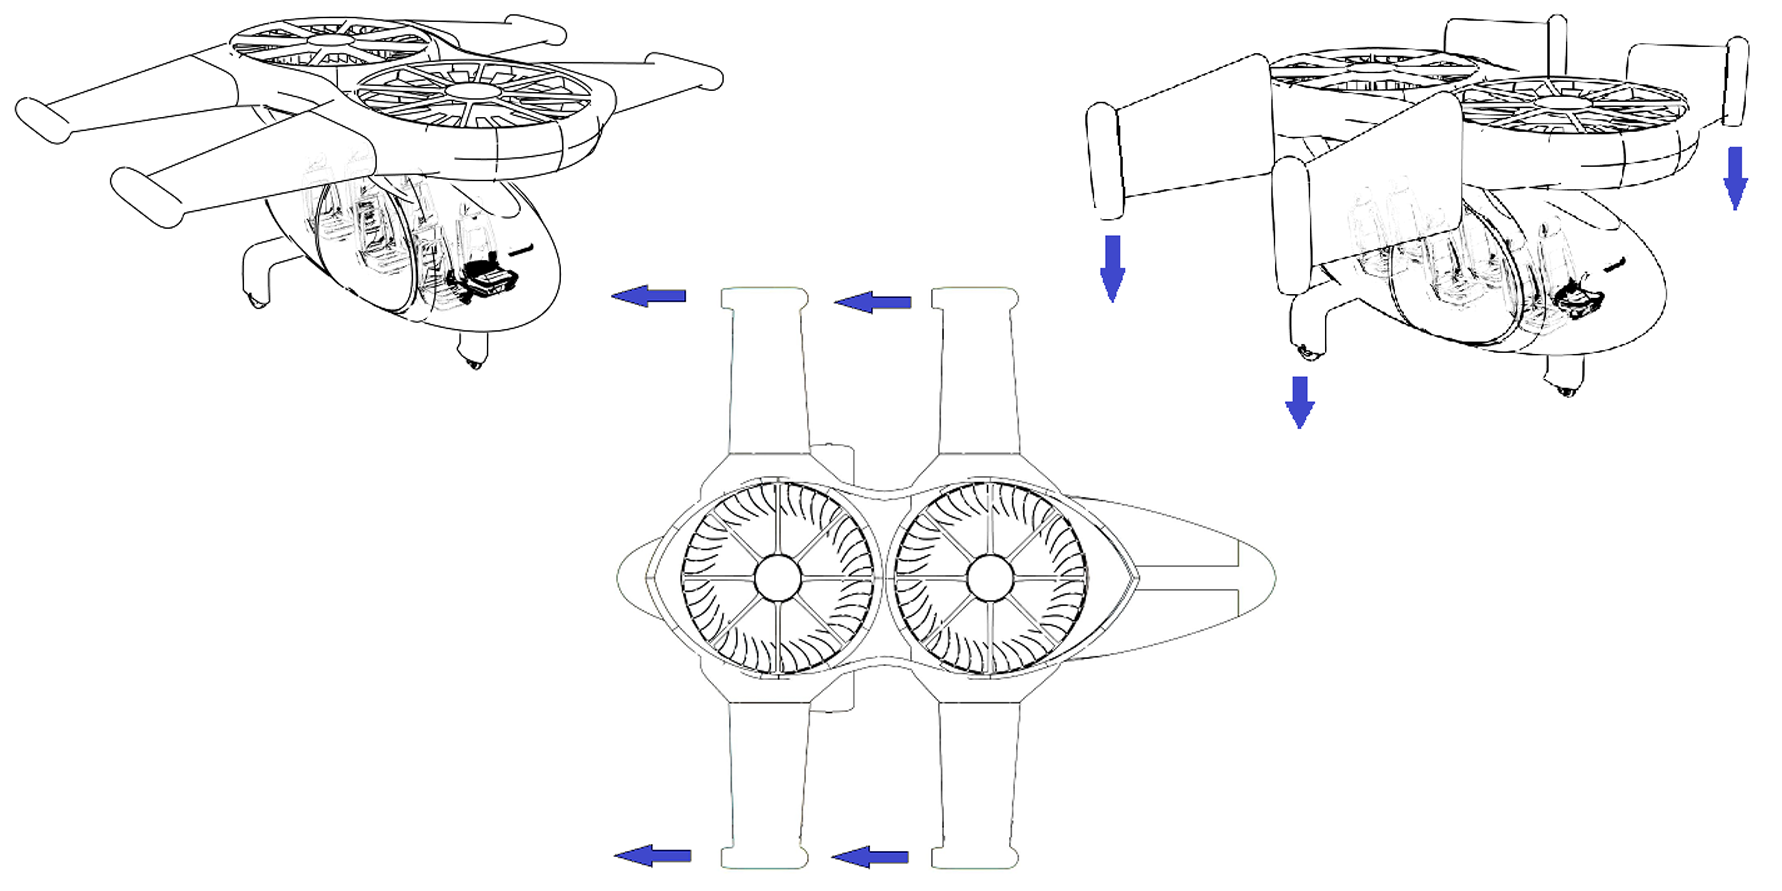 Jetcopter airvectoring